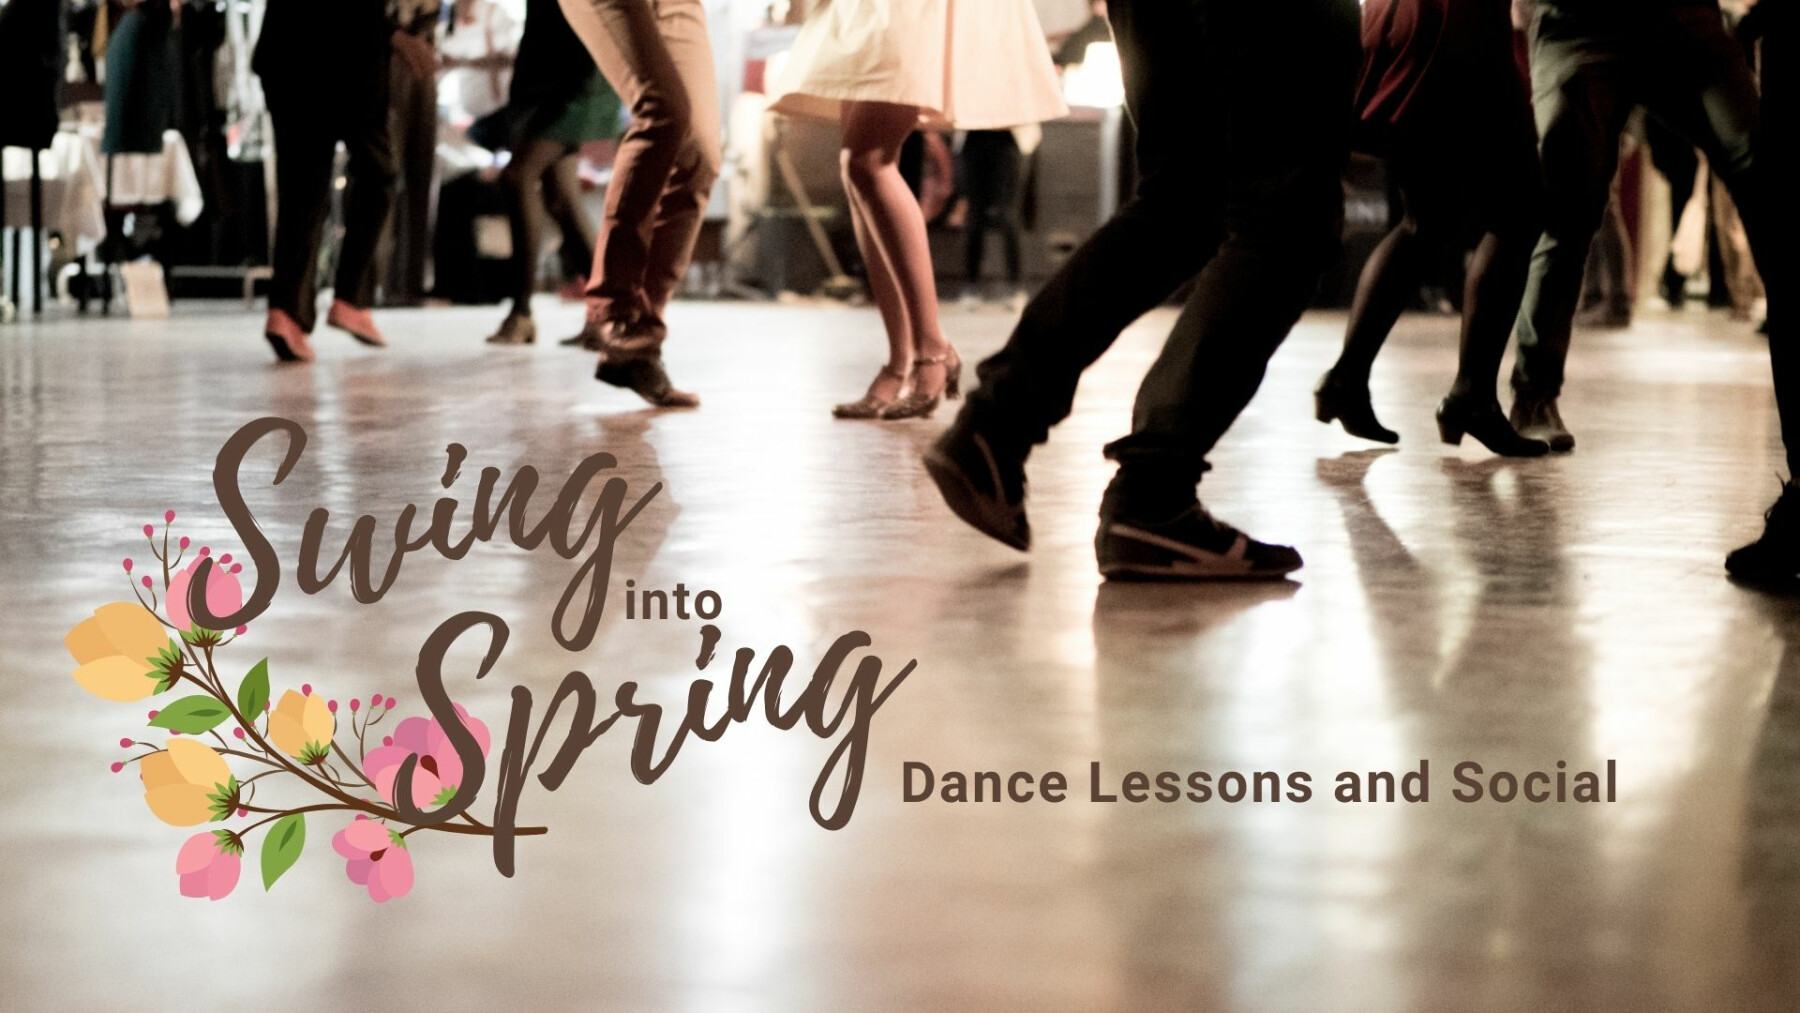 Swing into Spring Dance Lessons and Social